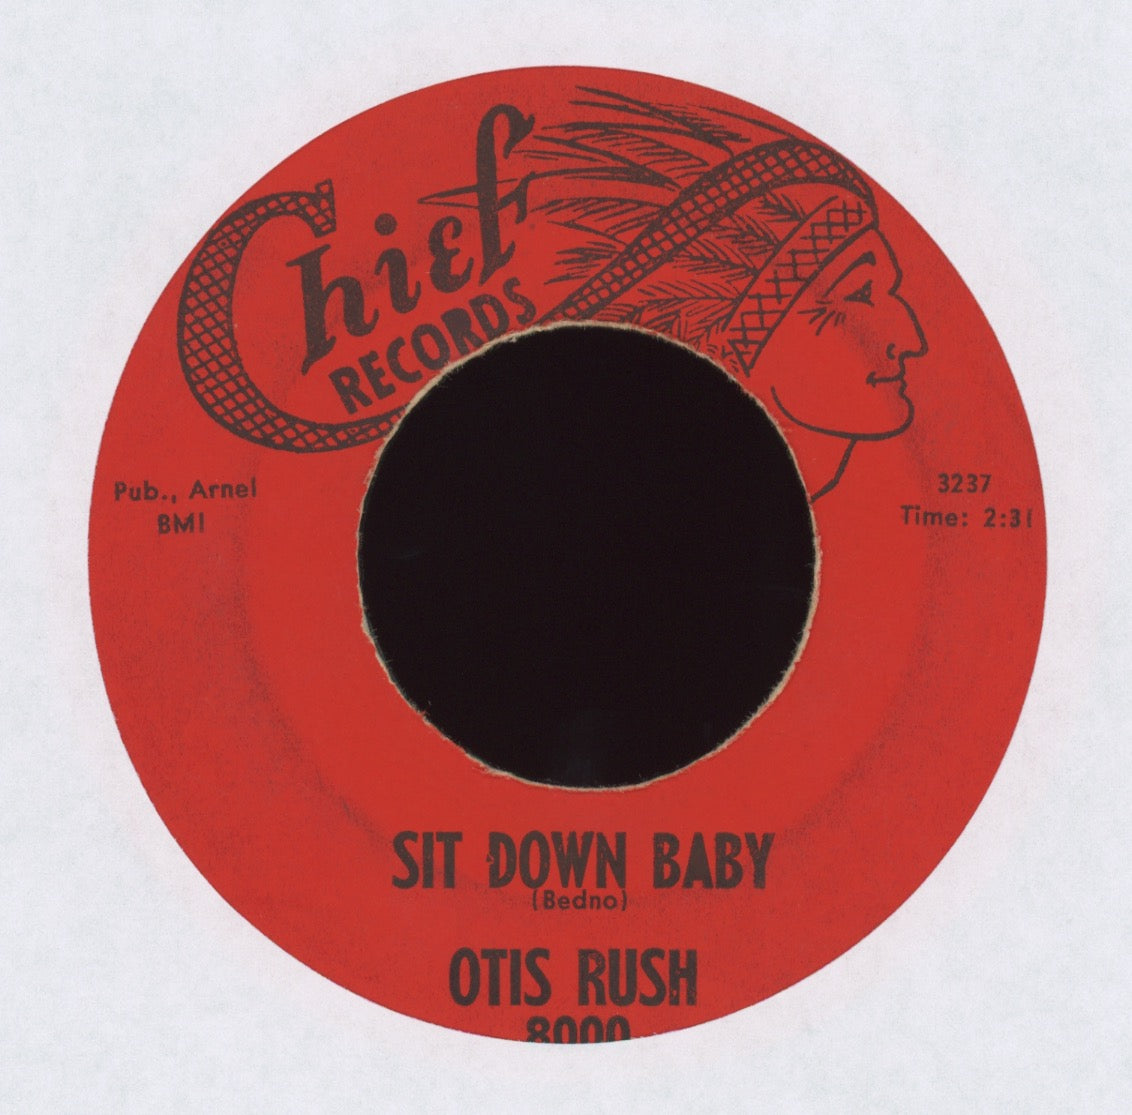 Otis Rush - Can't Quit You Baby on Chief